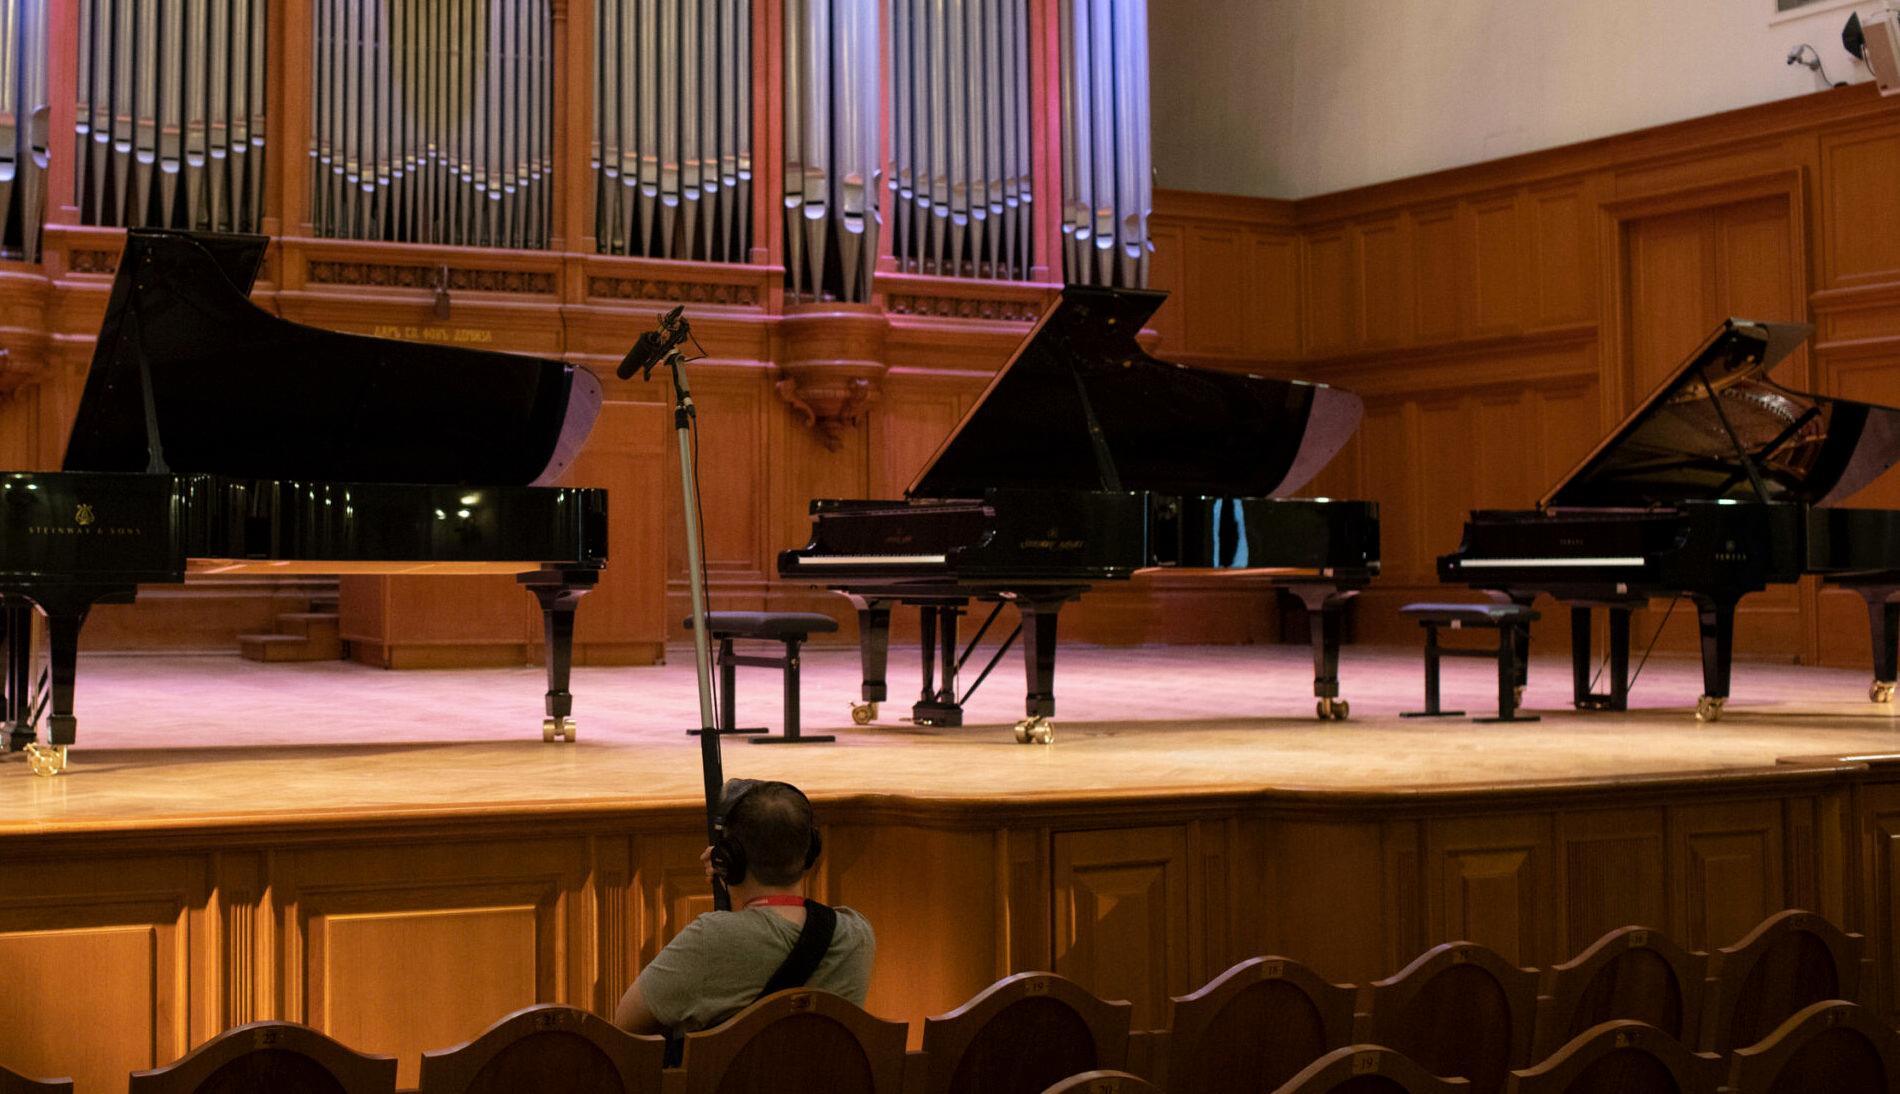 Participants in the specialty &#8220;Piano&#8221; chose pianos for competitive rounds